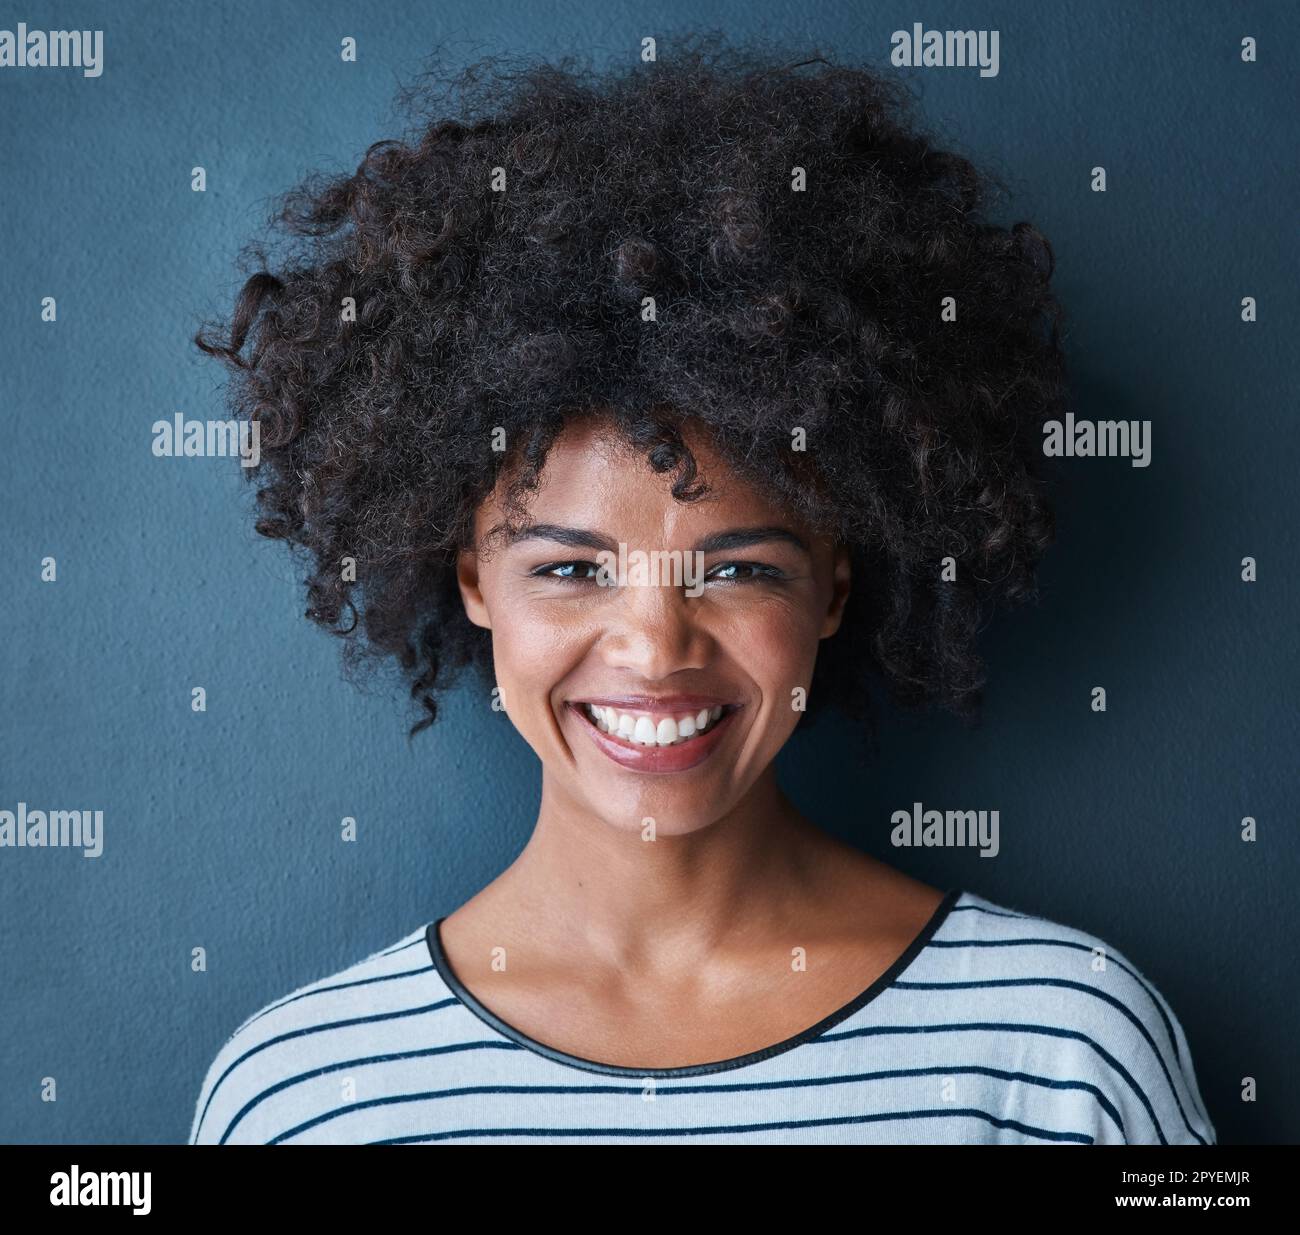 Making life beautiful one smile at a time. Studio portrait of an attractive and happy young woman posing against a blue background. Stock Photo